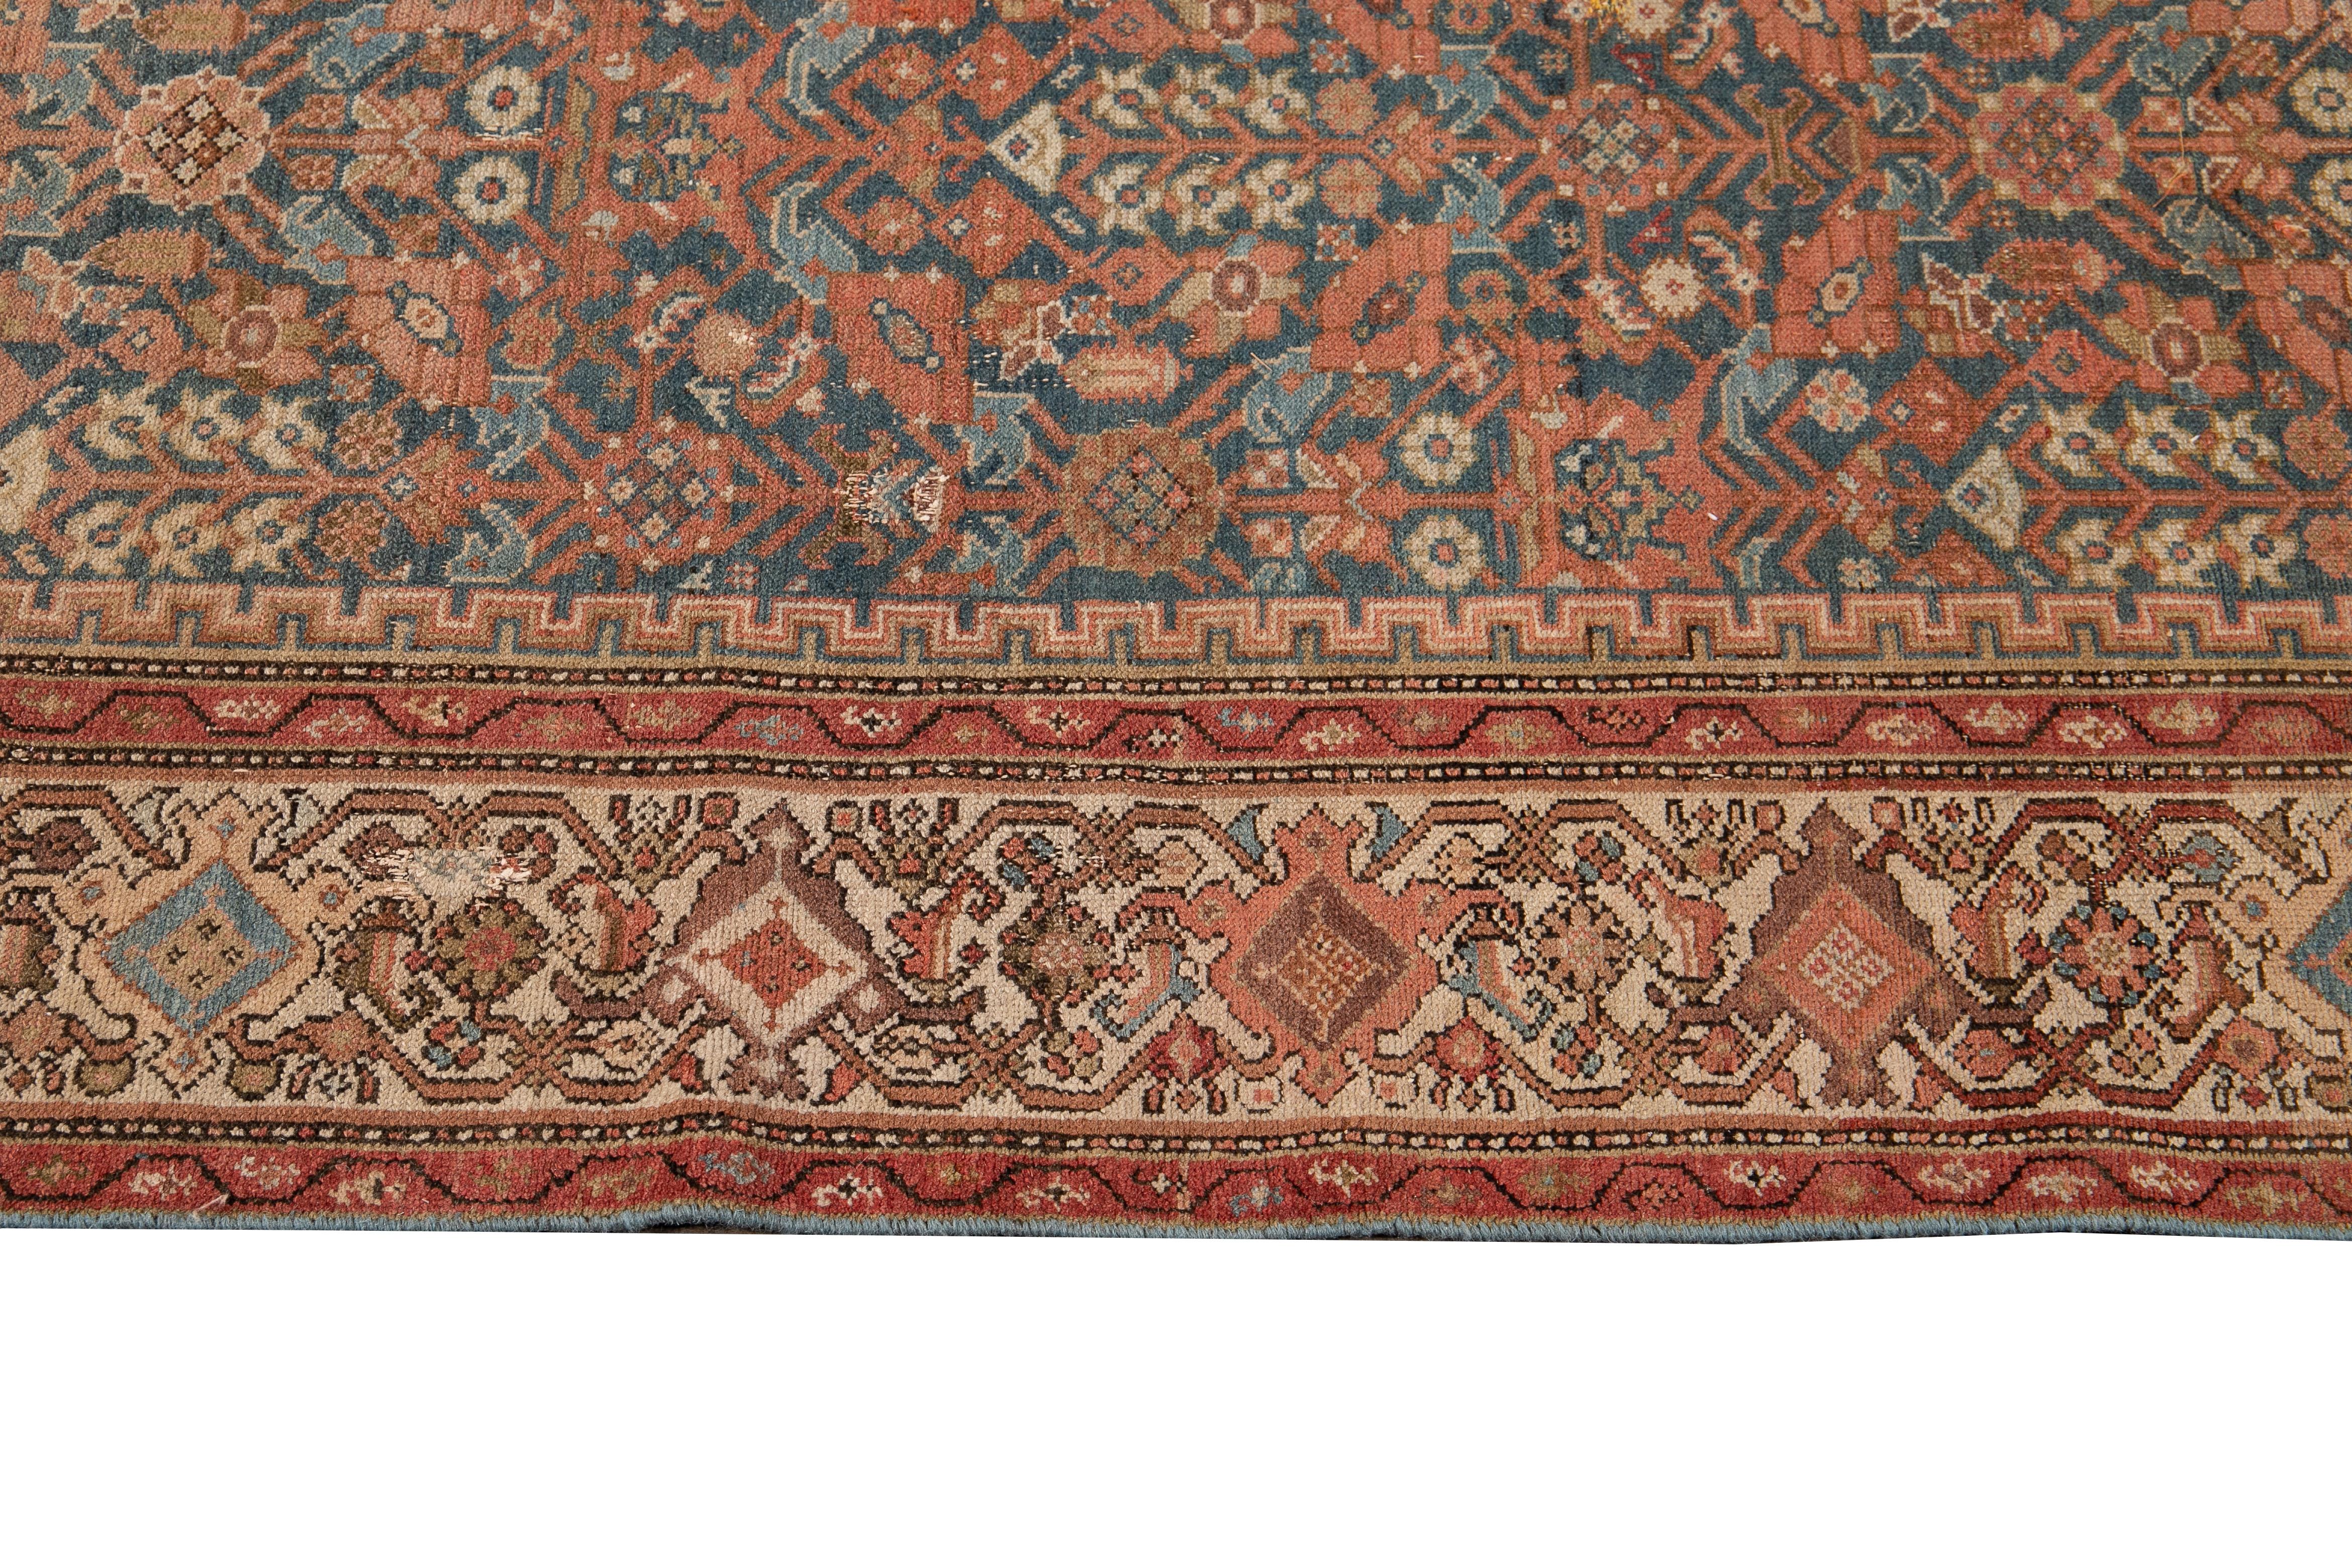 Early 20th Century Vintage Persian Malayer Runner Rug  In Good Condition For Sale In Norwalk, CT